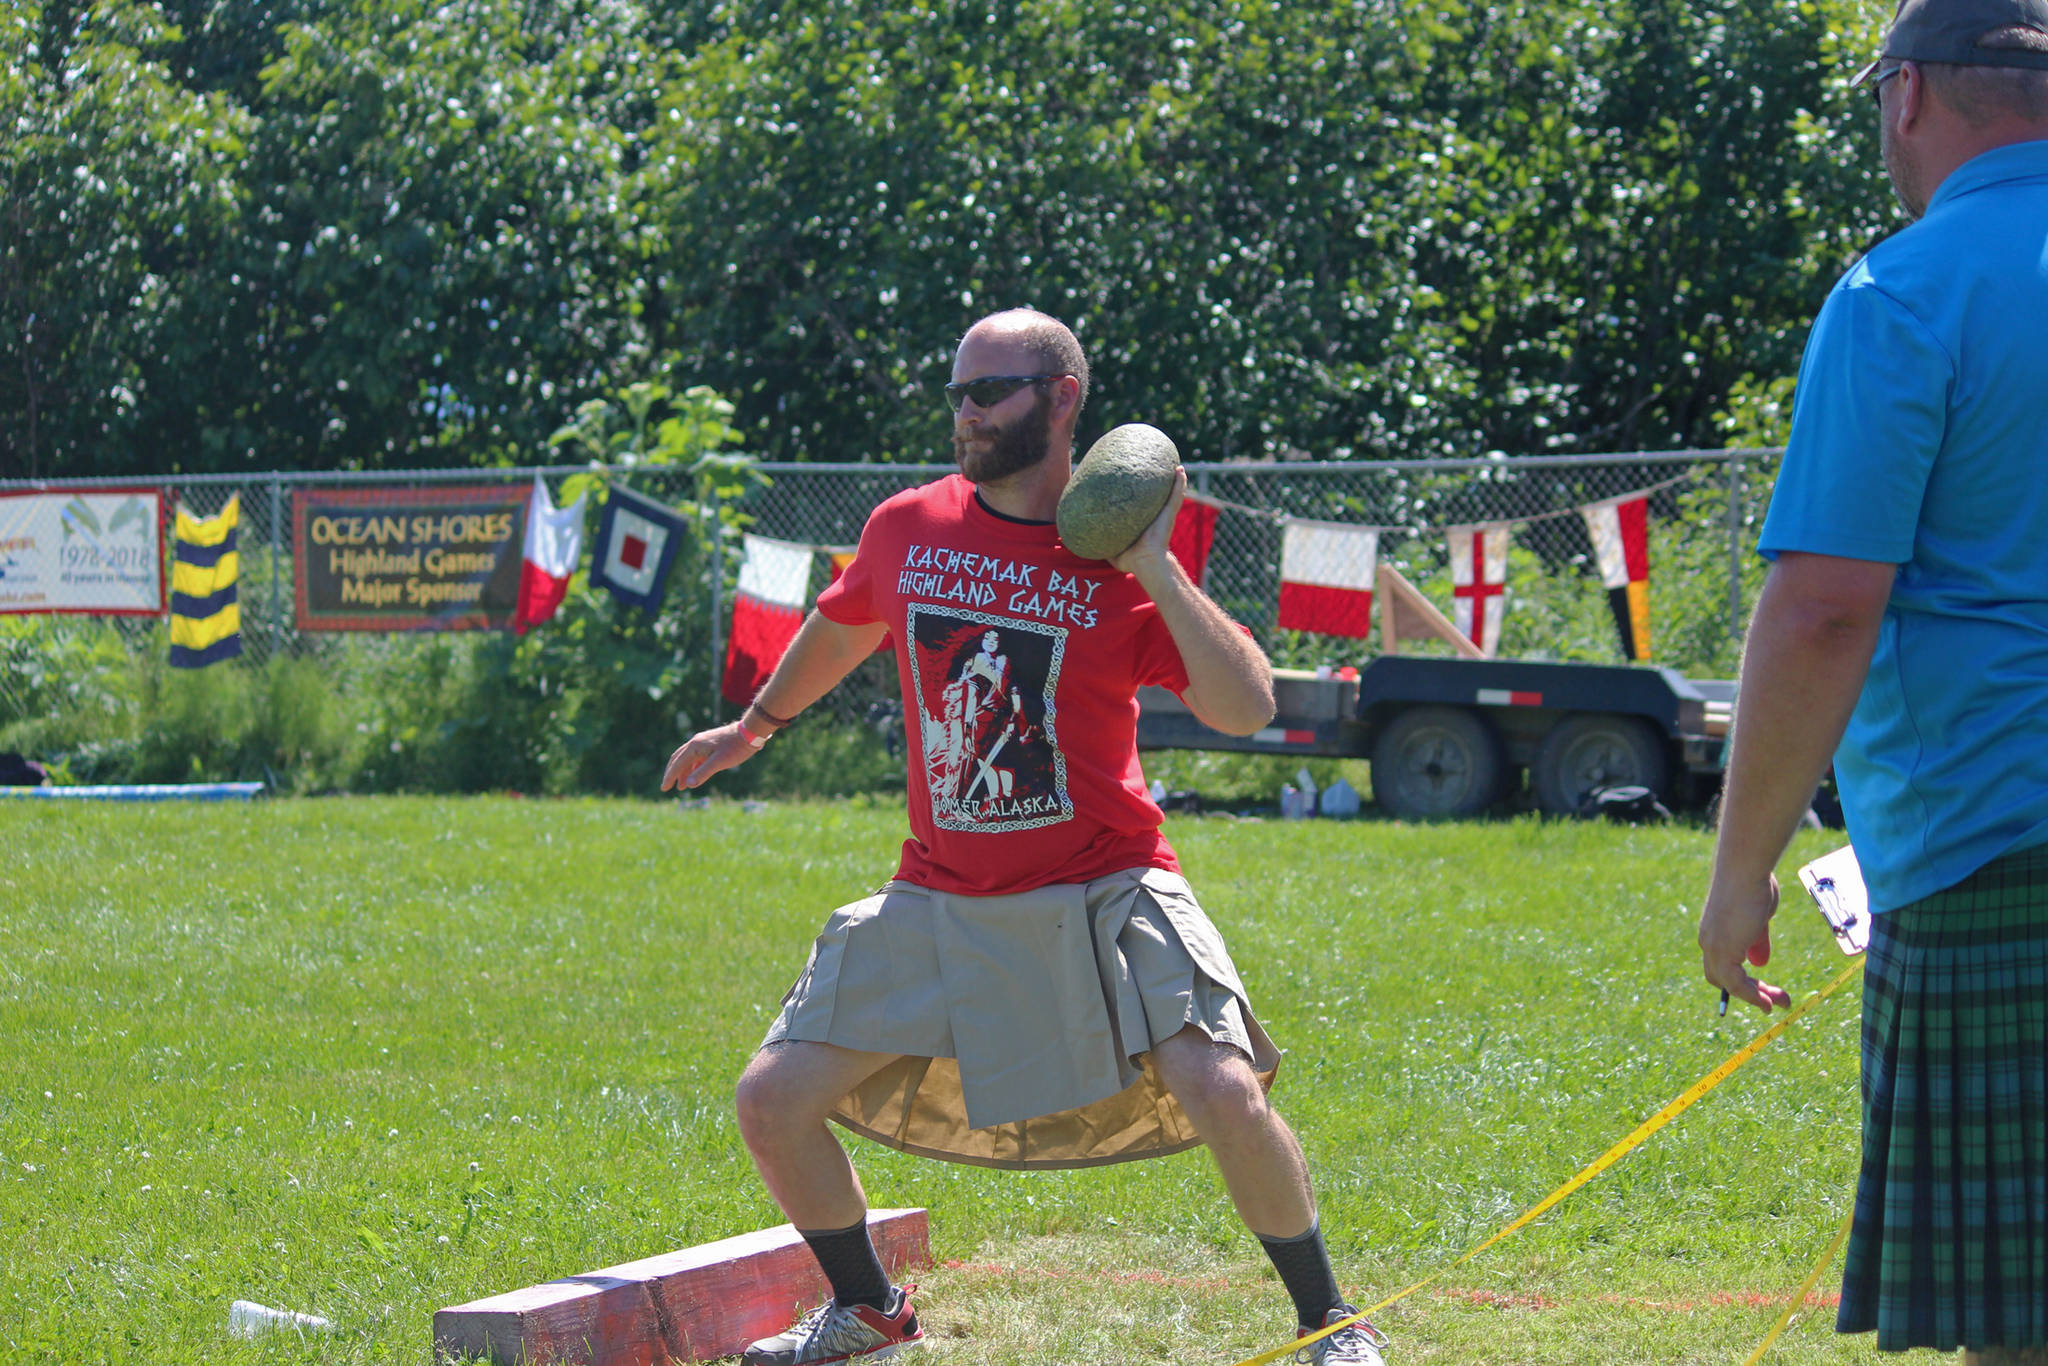 A novice competitor prepares to throw a braemar stone during the Kachemak Bay Scottish Highland Games on Saturday, July 7, 2018 at Karen Hornaday Park in Homer, Alaska. (Homer News file photo)